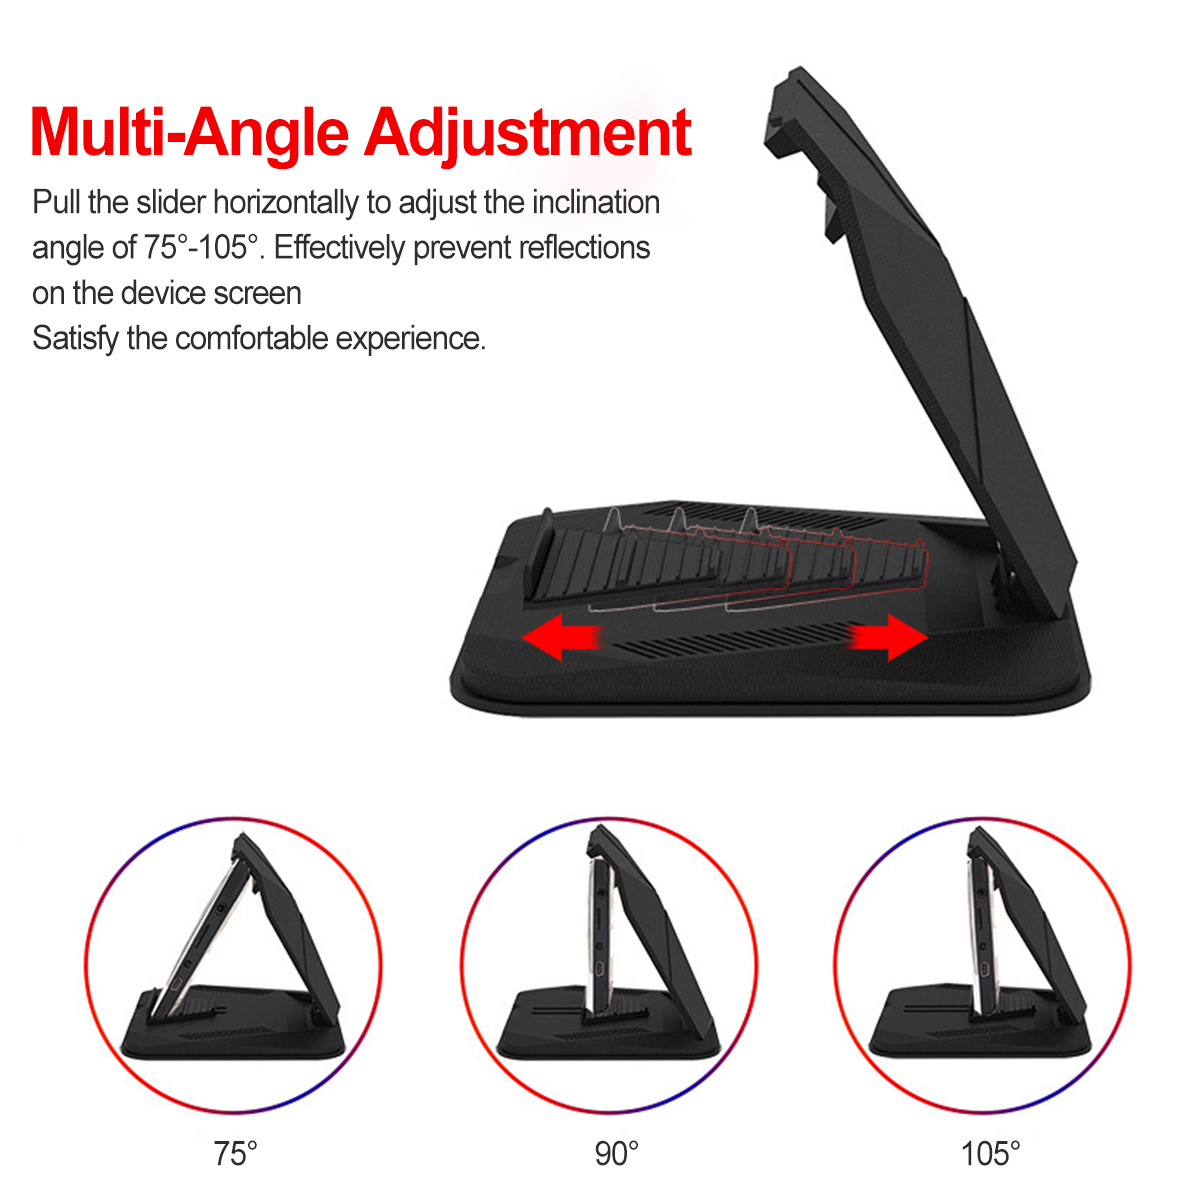 Foldable-Multifunctional-Car-Dashboard-Mount-Mobile-Phone-GPS-Holder-Stand-for-30-97-inch-Devices-1791089-4